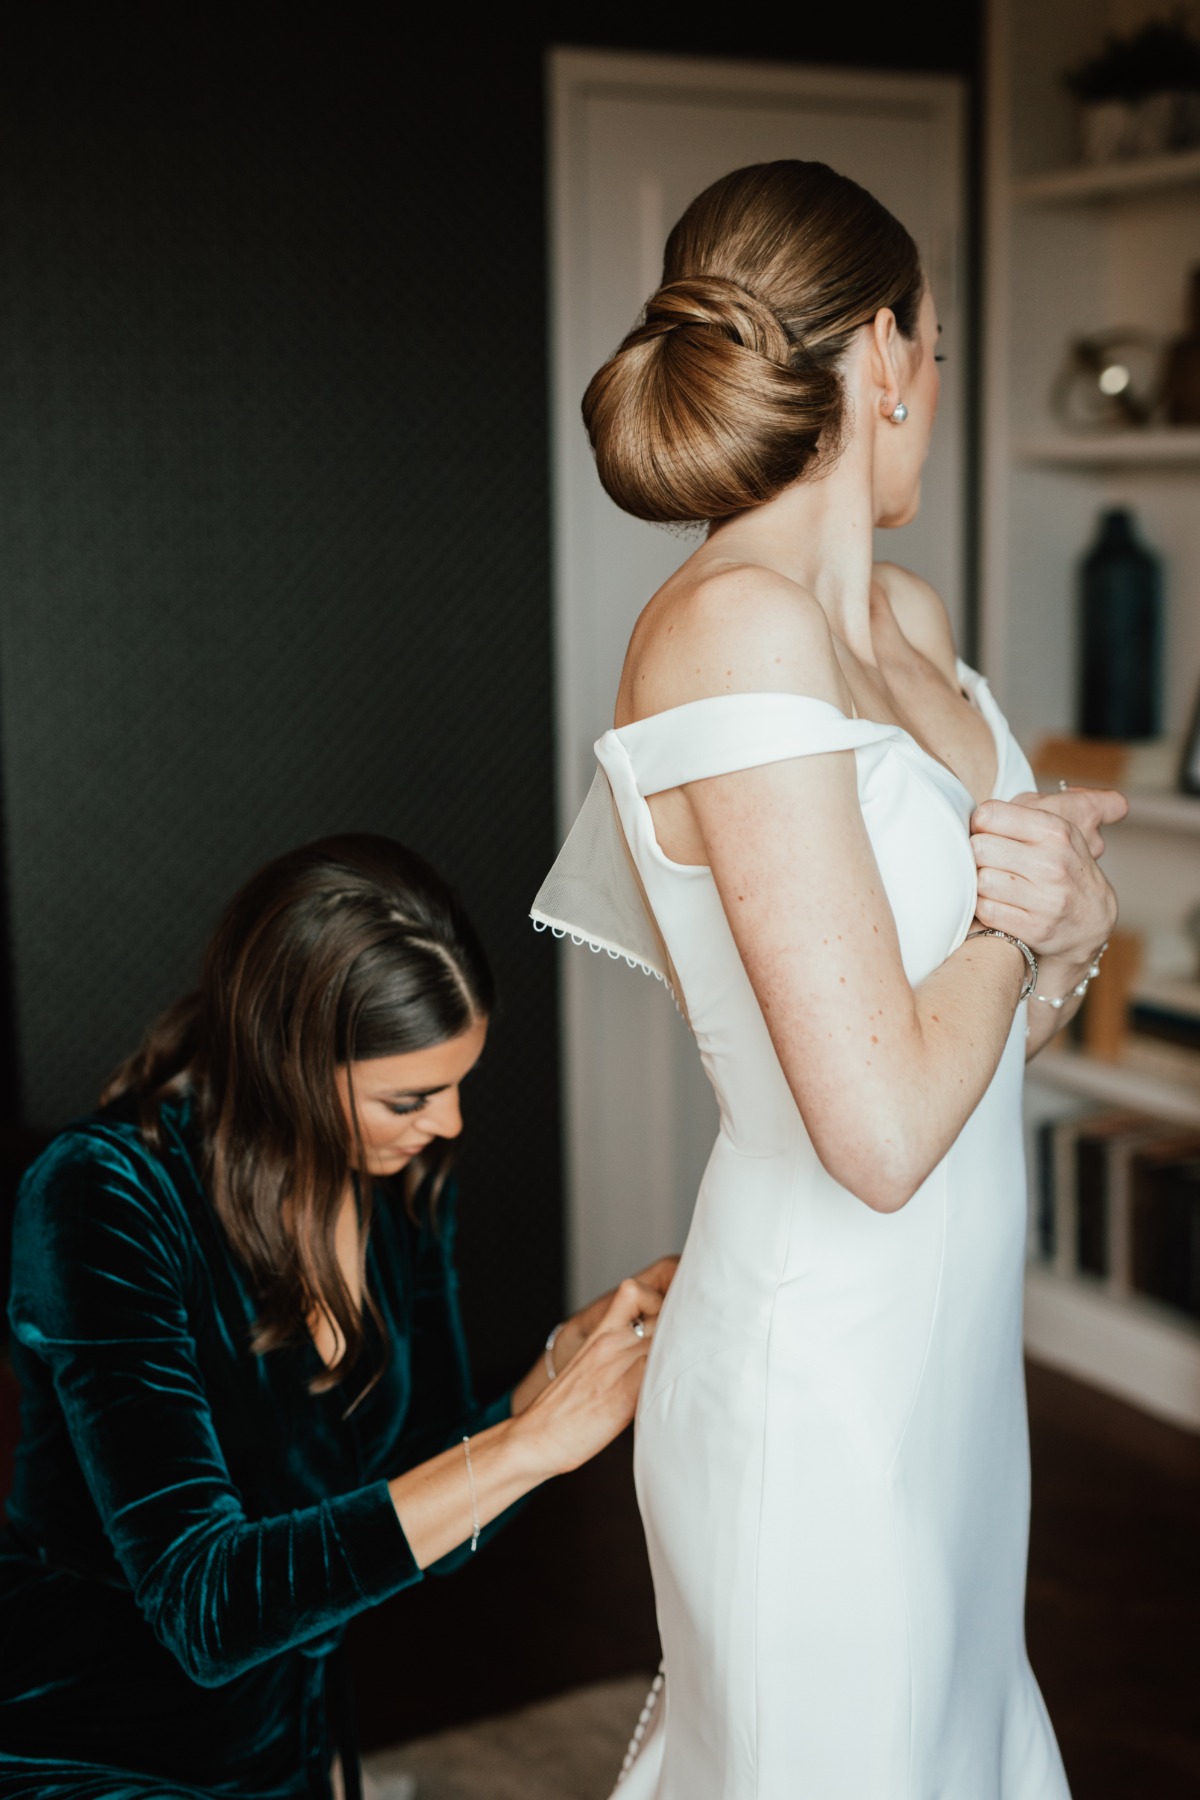 How To Have A Sophisticated Jewel Toned Wedding